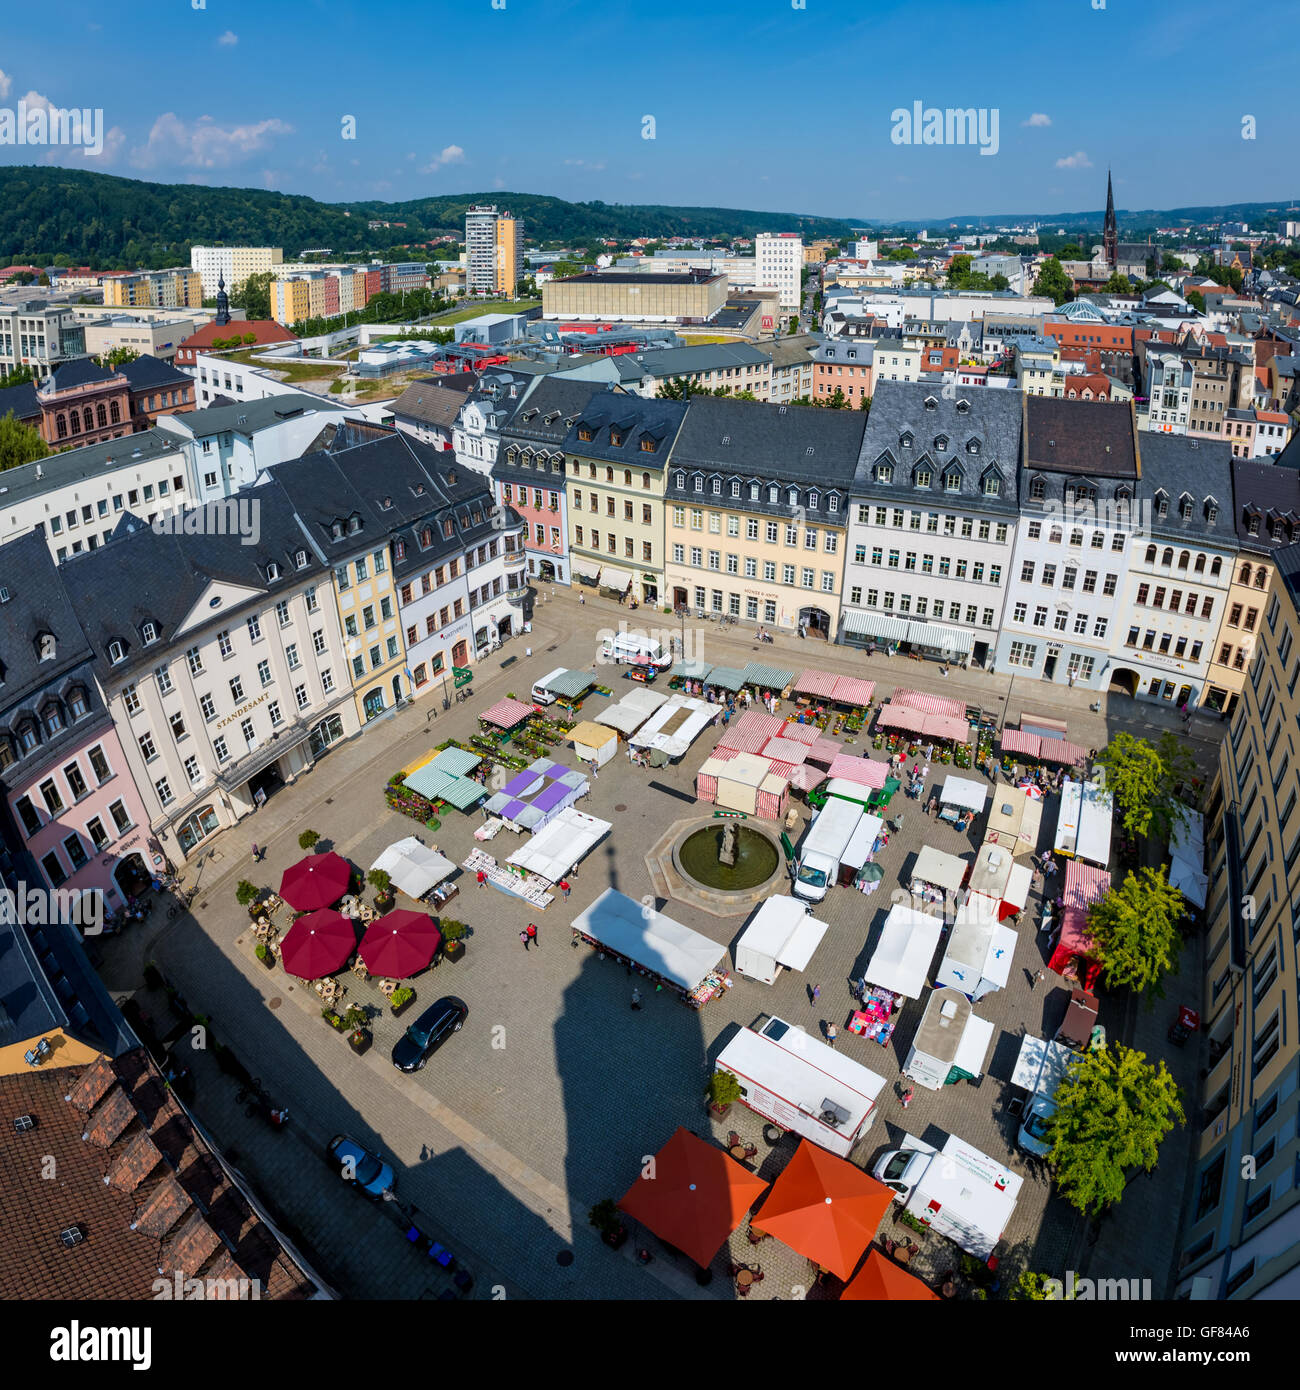 MUNICH, GERMANY - JULY 15, 2015: Aerial view from the marketplace in Munich. Munuch is the capital and largest city Stock Photo